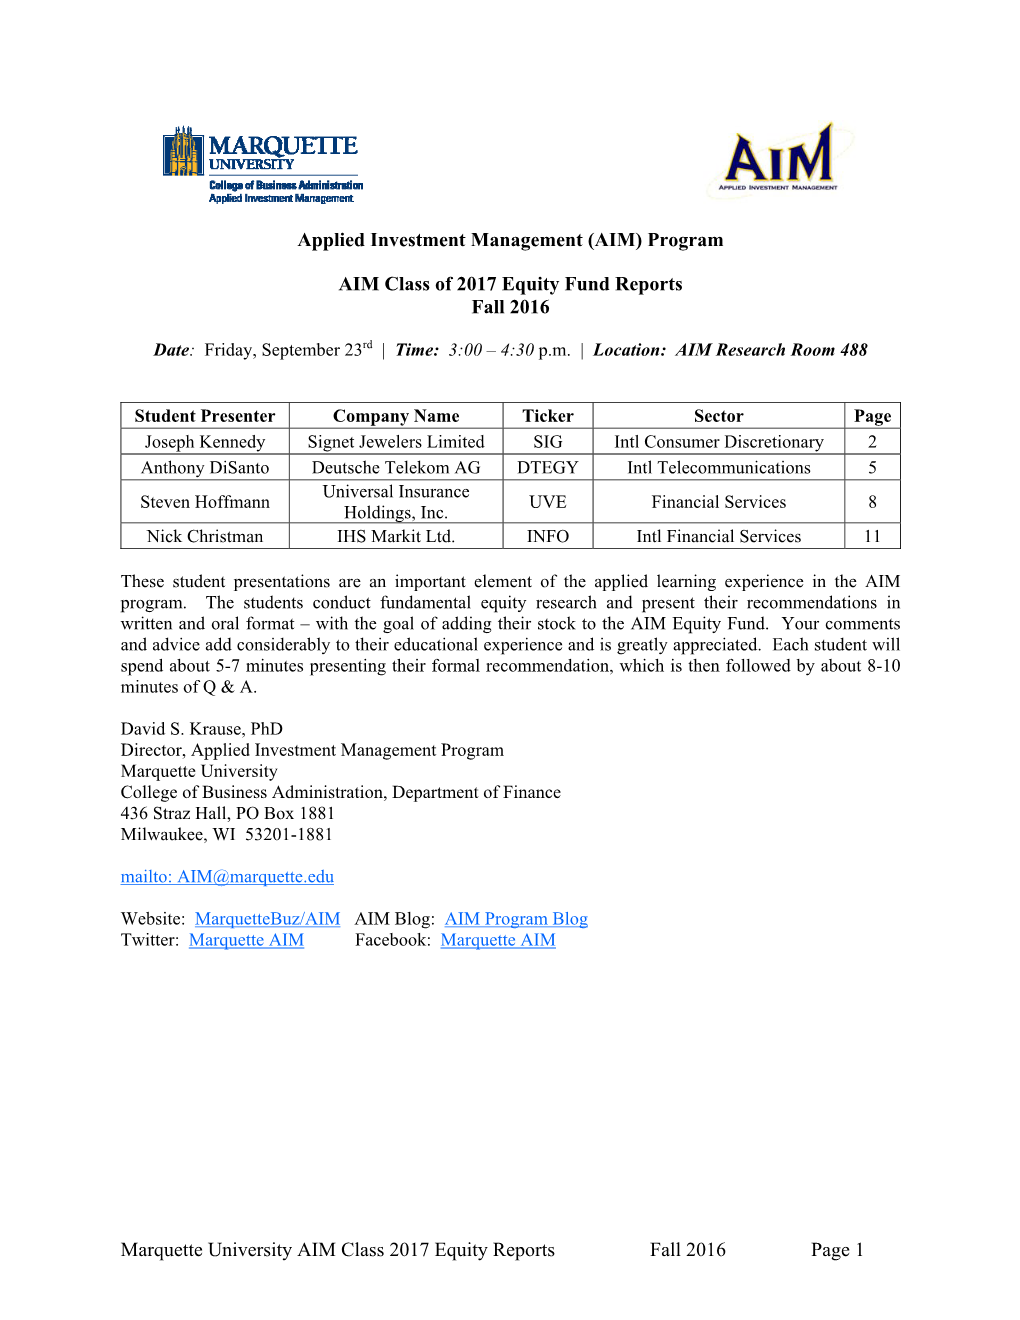 Marquette University AIM Class 2017 Equity Reports Fall 2016 Page 1 Applied Investment Management